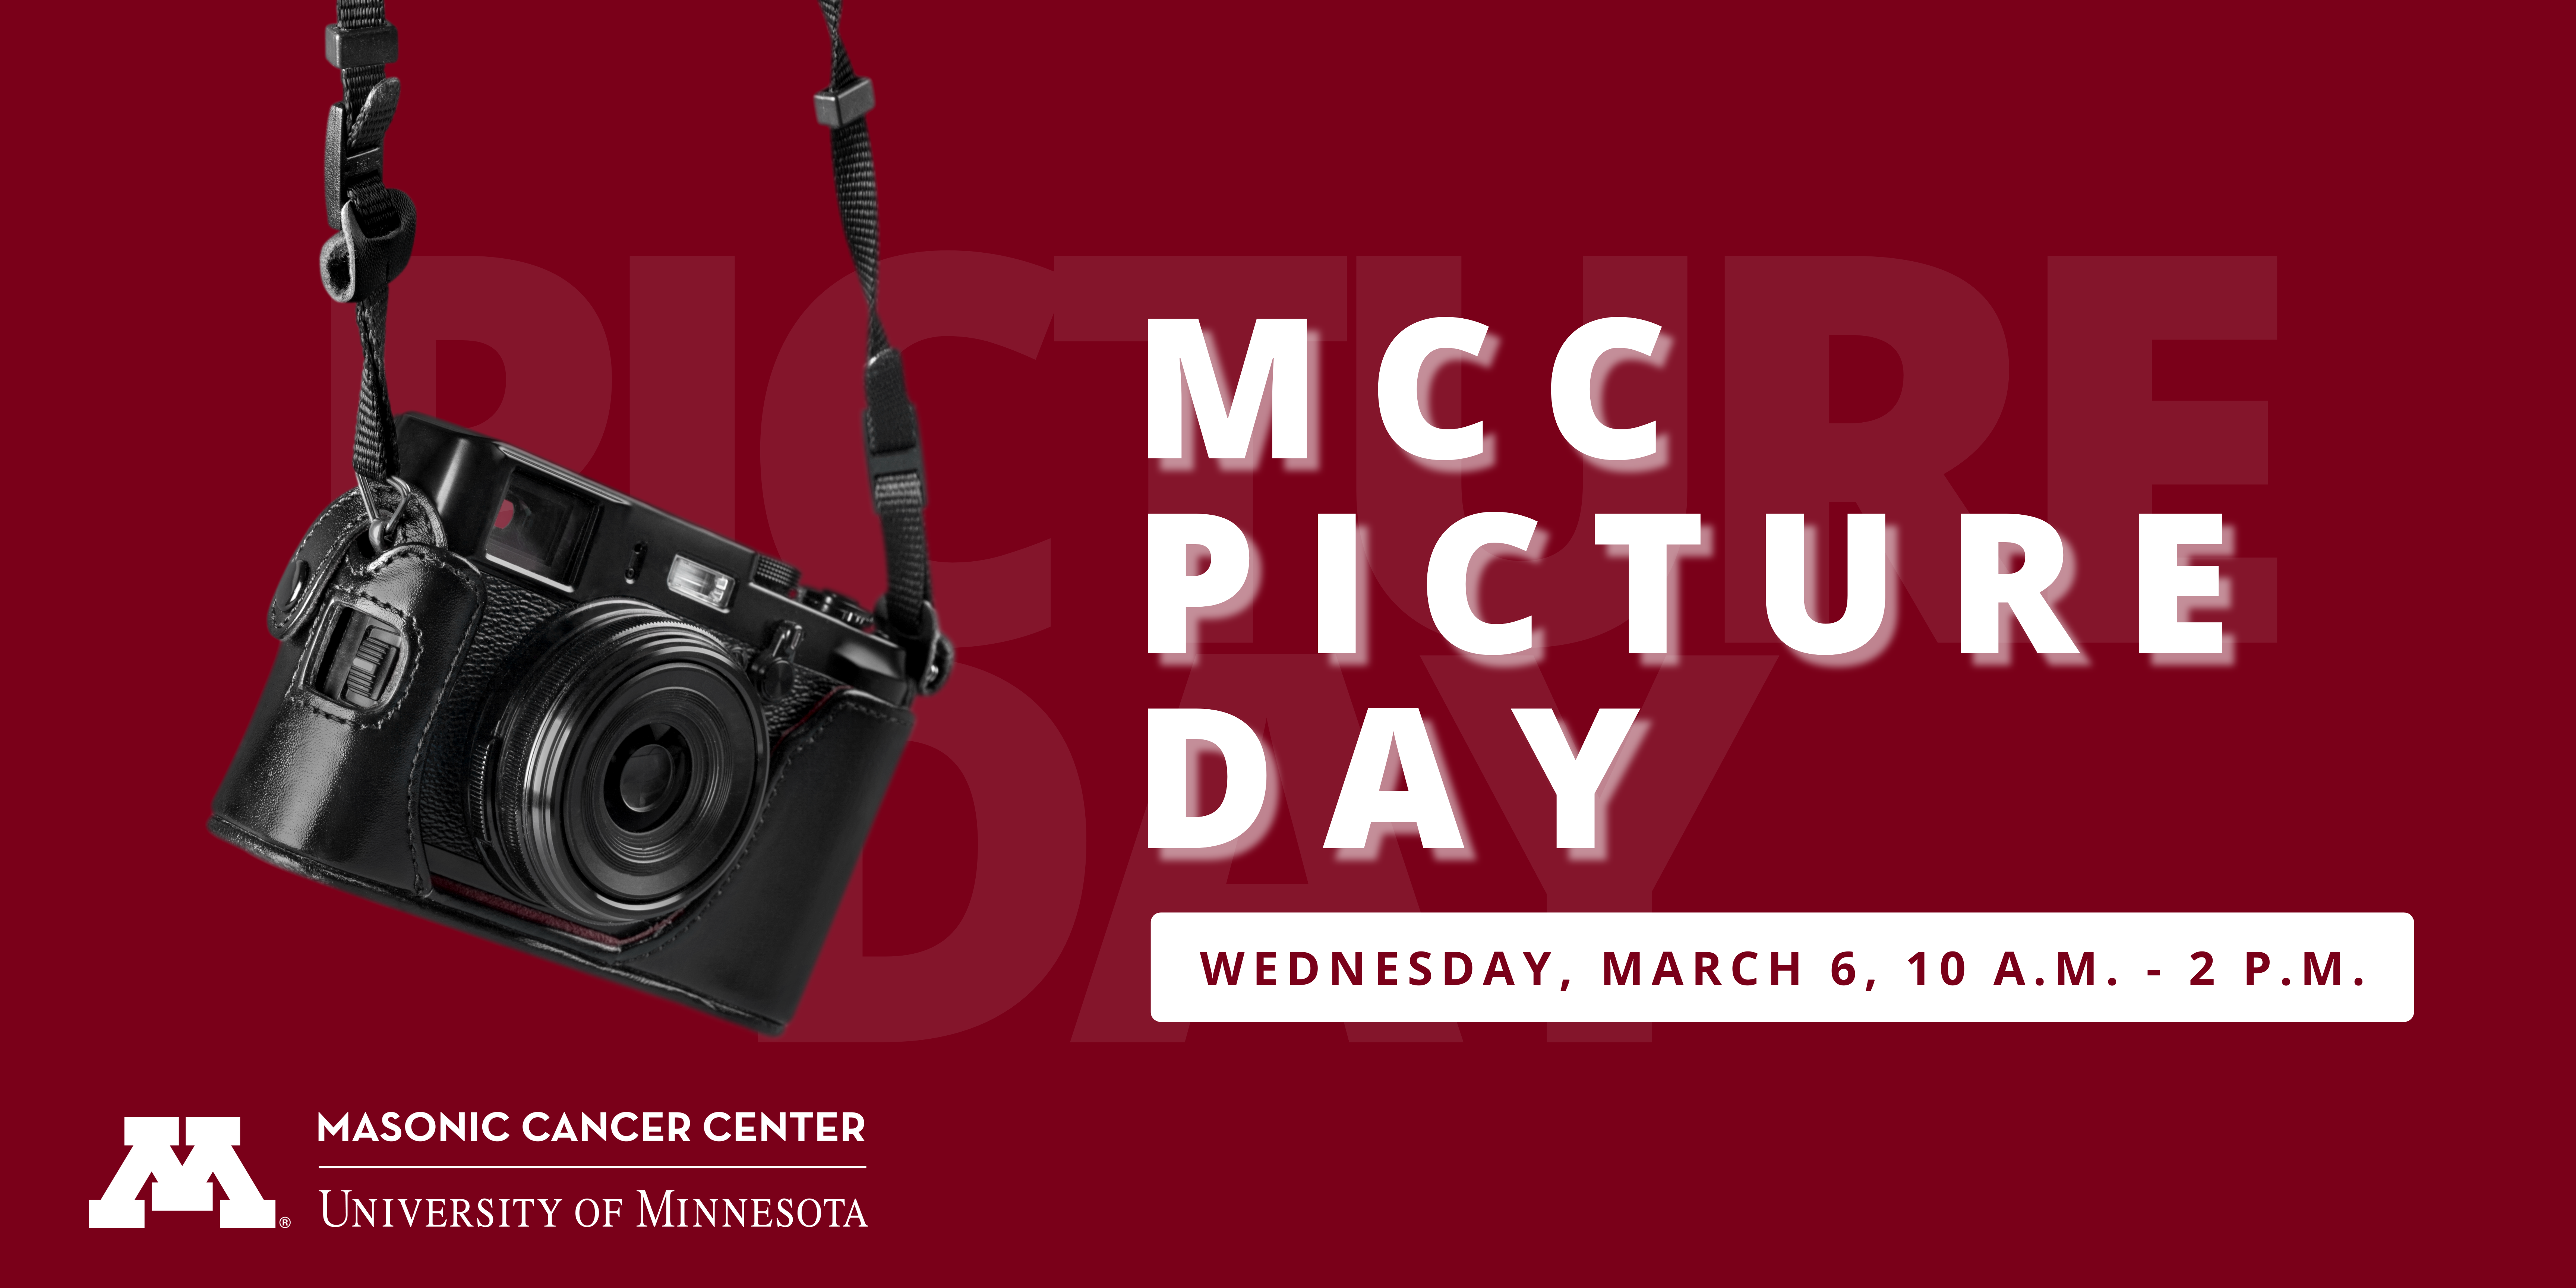 MCC Picture Day Flyer